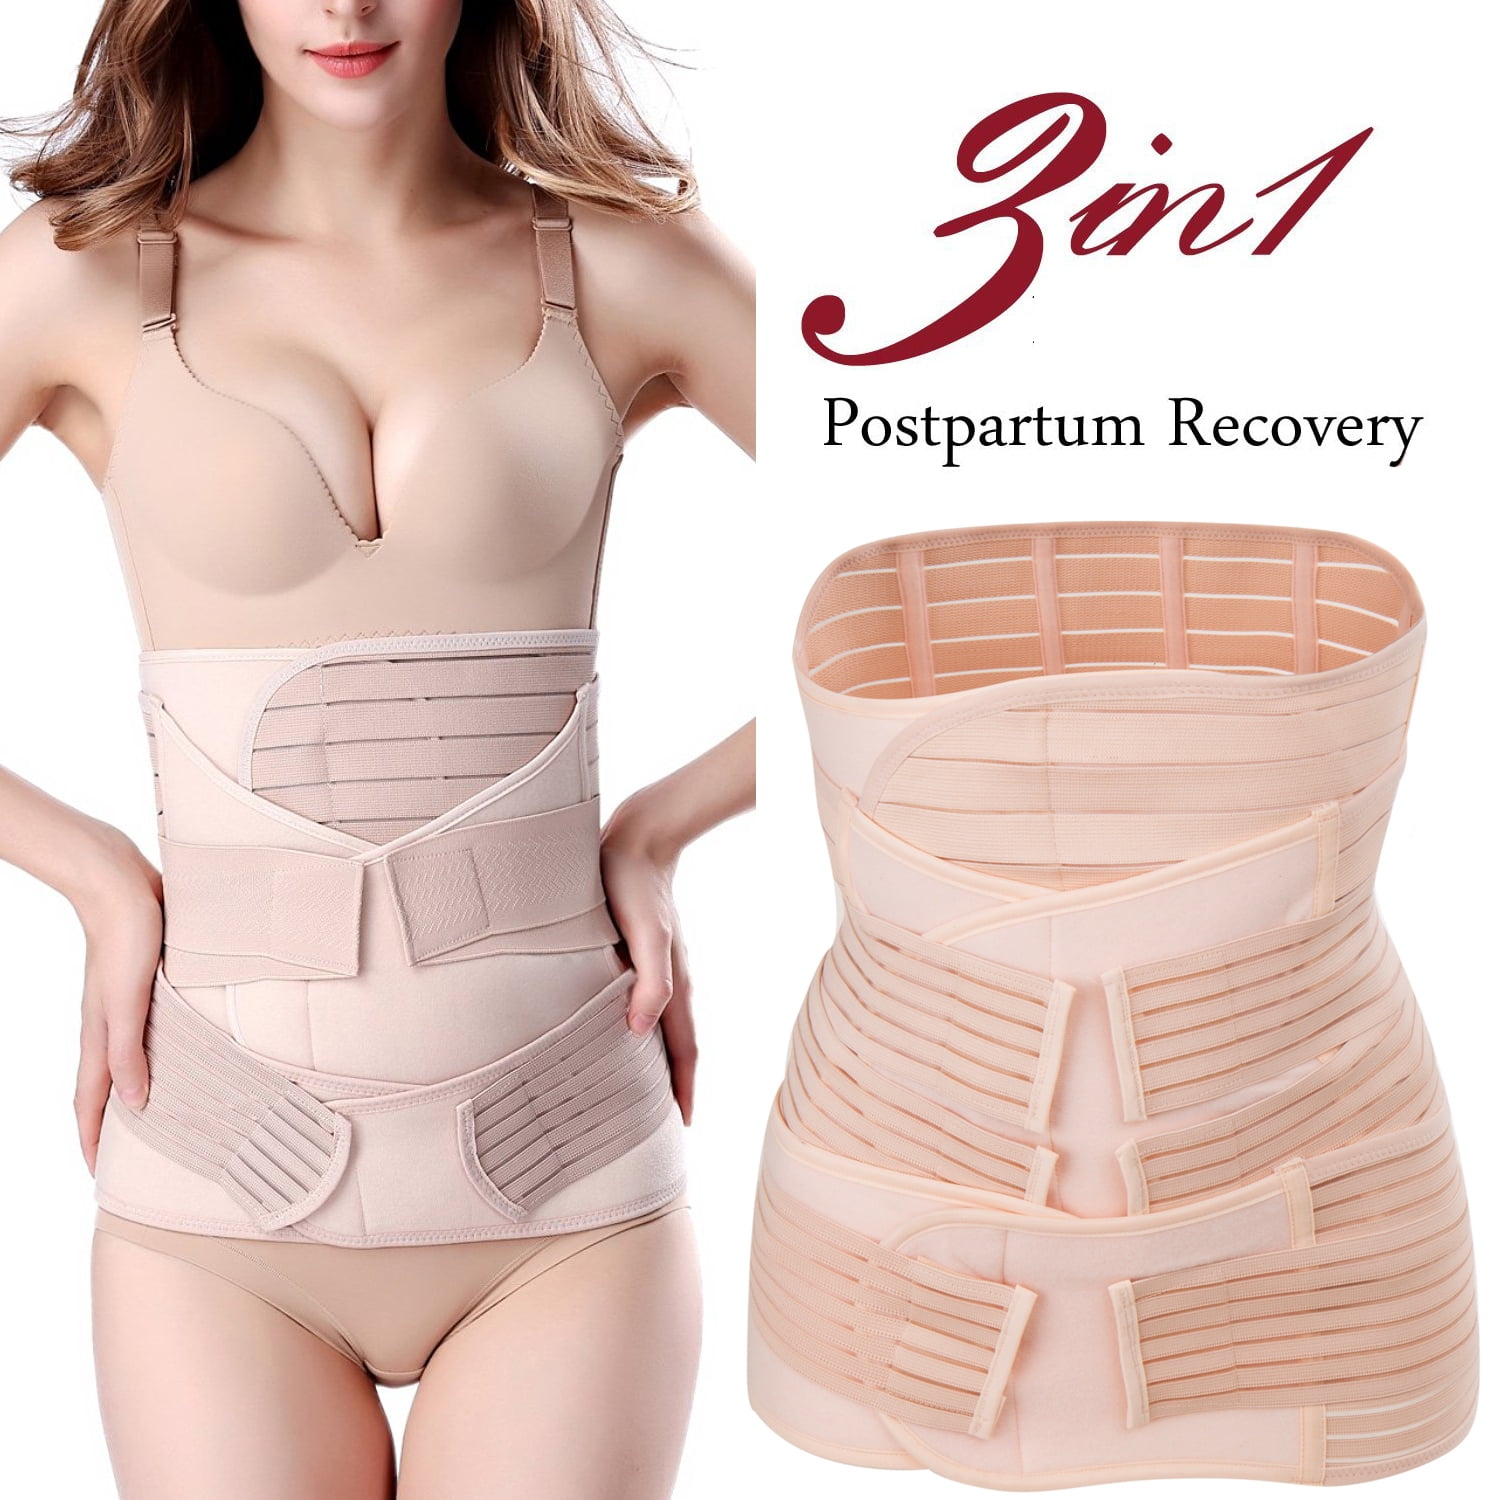 Women Postpartum Belt Belly Wrap Body Shaper Support Recovery Girdle After Birth